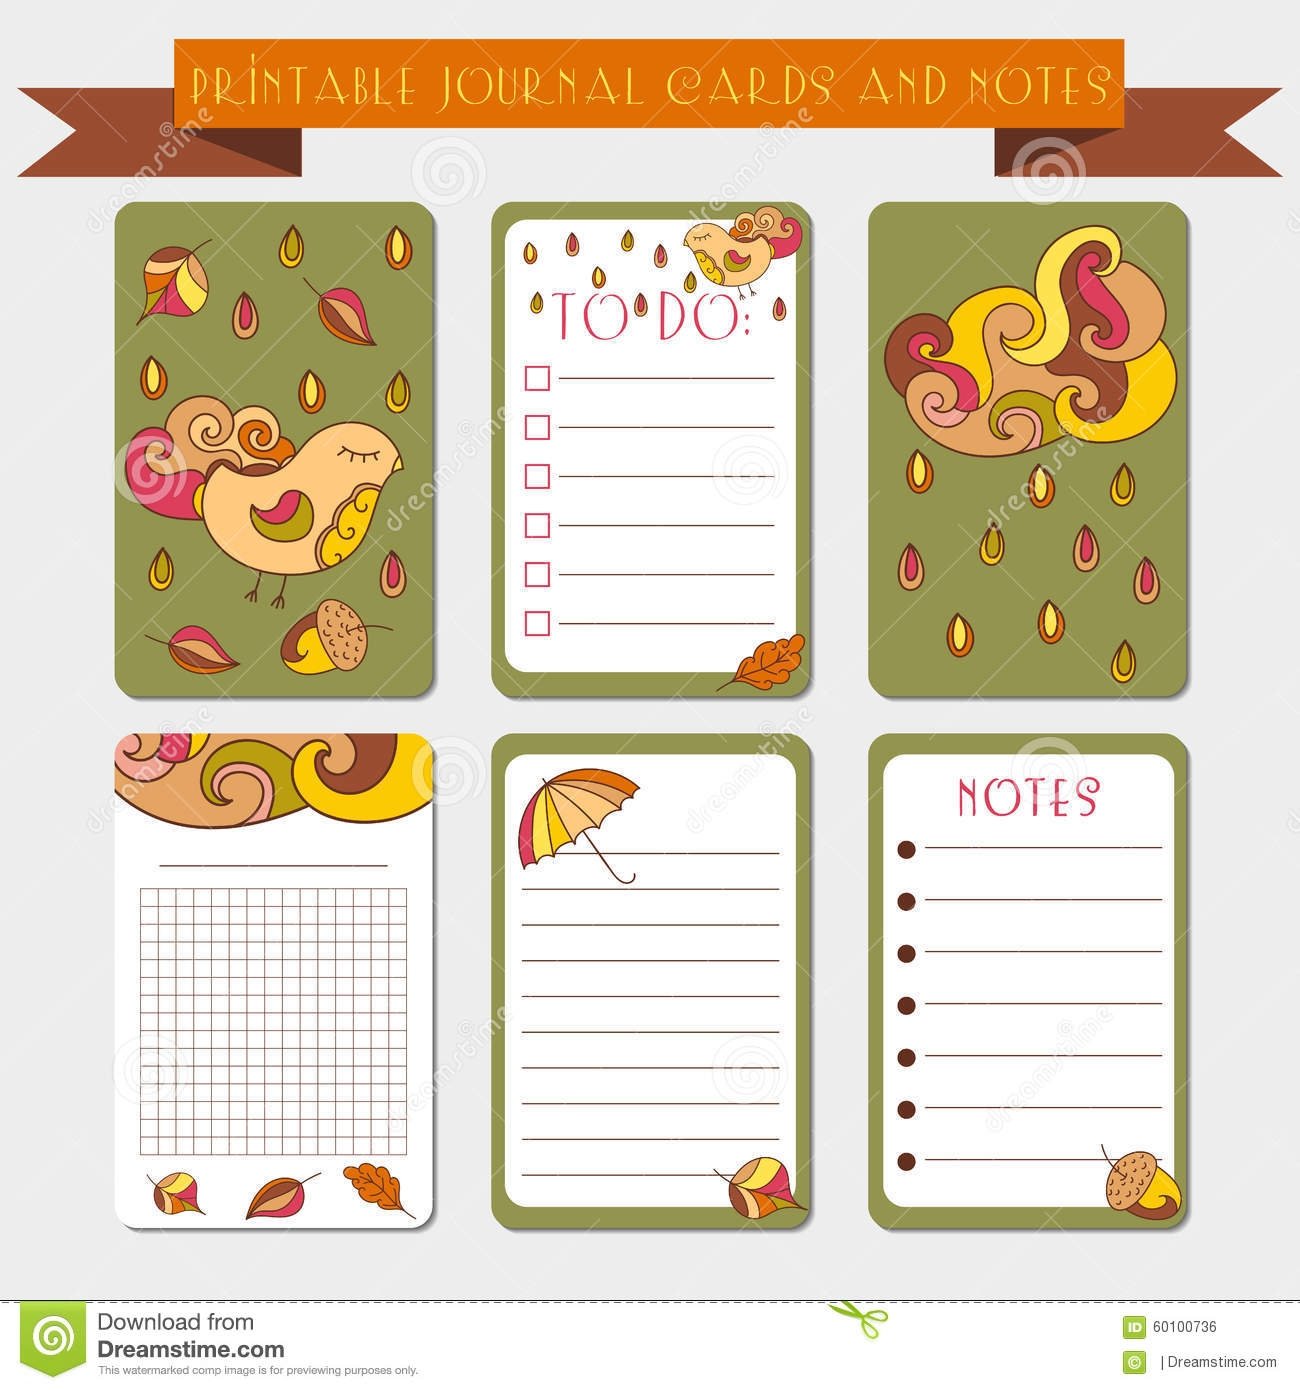 Printable Notes Journal Cards With Autmun Illustrations Template For Scrap Booking Wrapping Notepad Notebook Diary Stock Vector Illustration Of Lovely Accessories 60100736